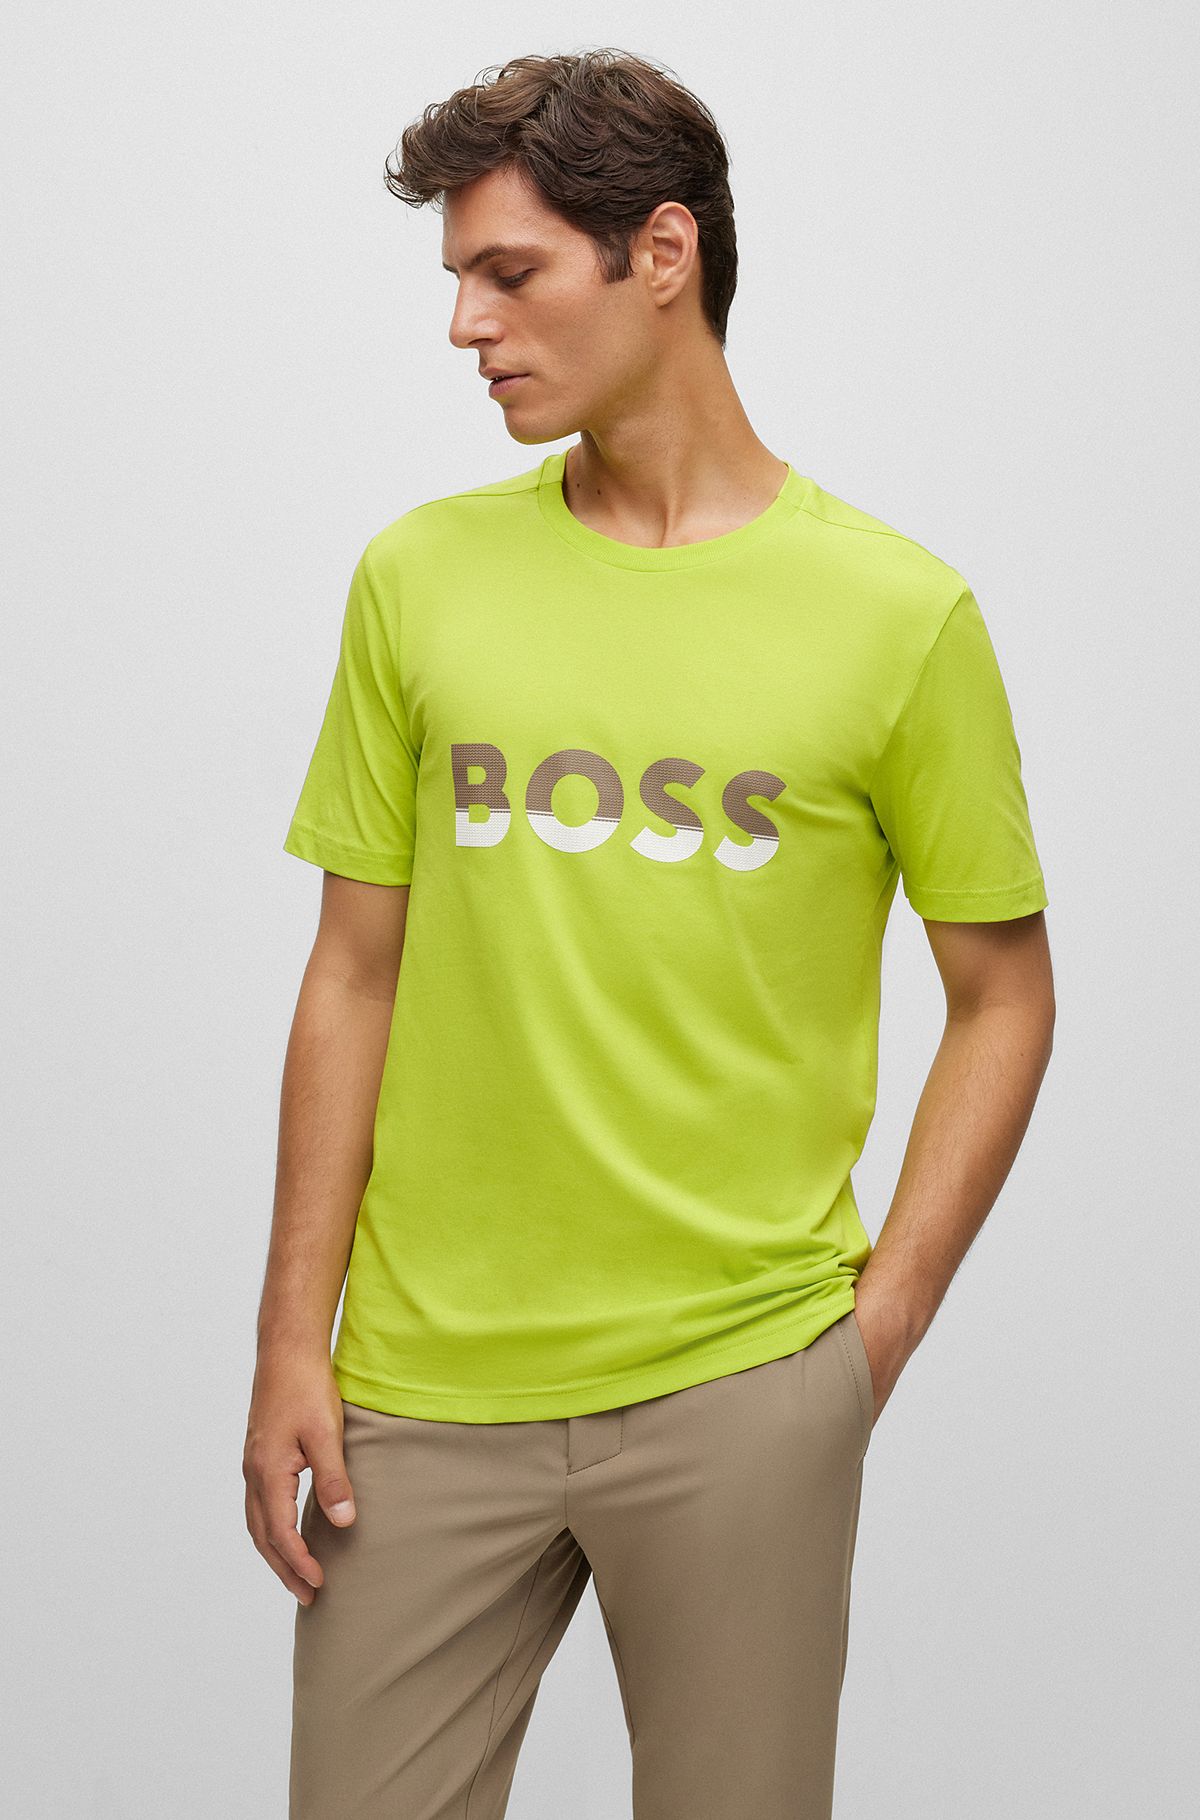 HUGO BOSS Online Store - No search results